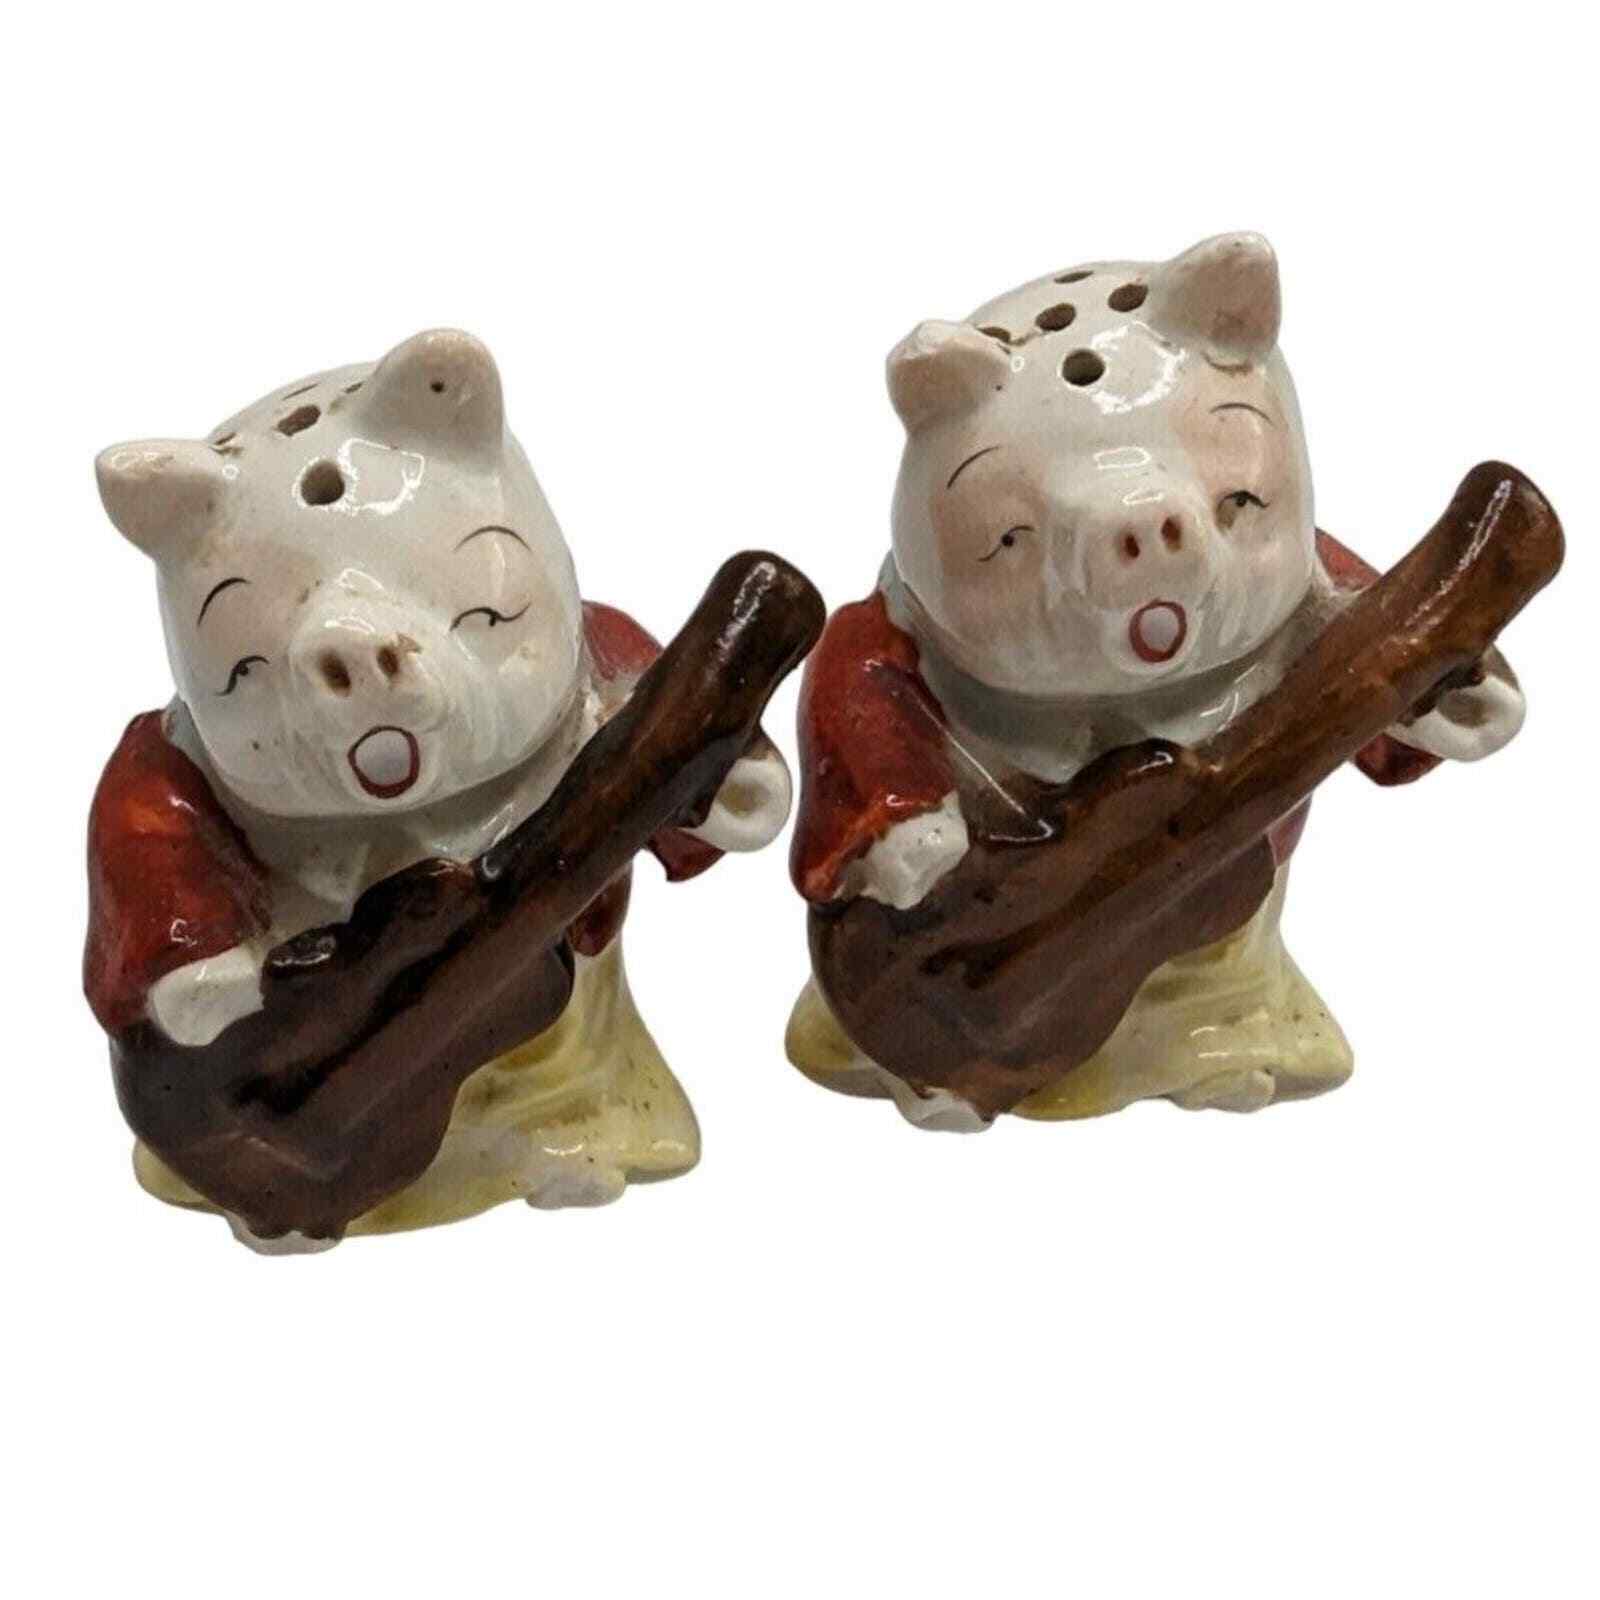 Vintage Salt and Pepper Shaker Set 1950s Pigs Playing Guitar Hand Painted